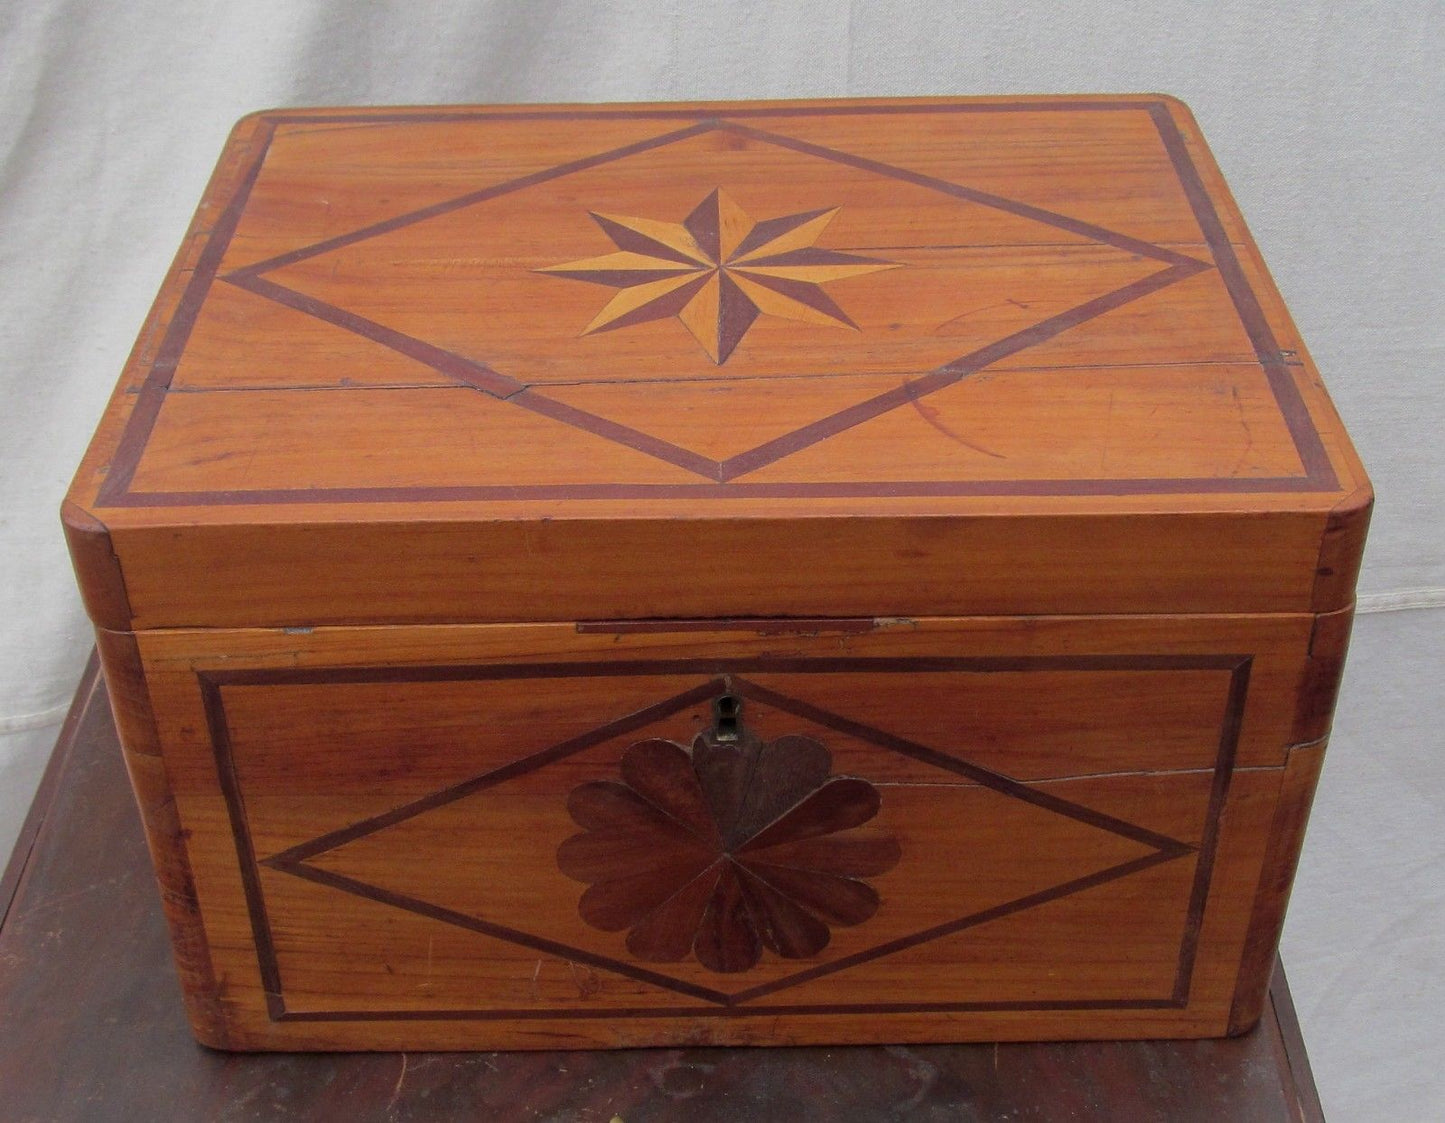 LARGE 19TH CENTURY FINELY INLAID SAILORS BOX WITH MARINERS STAR